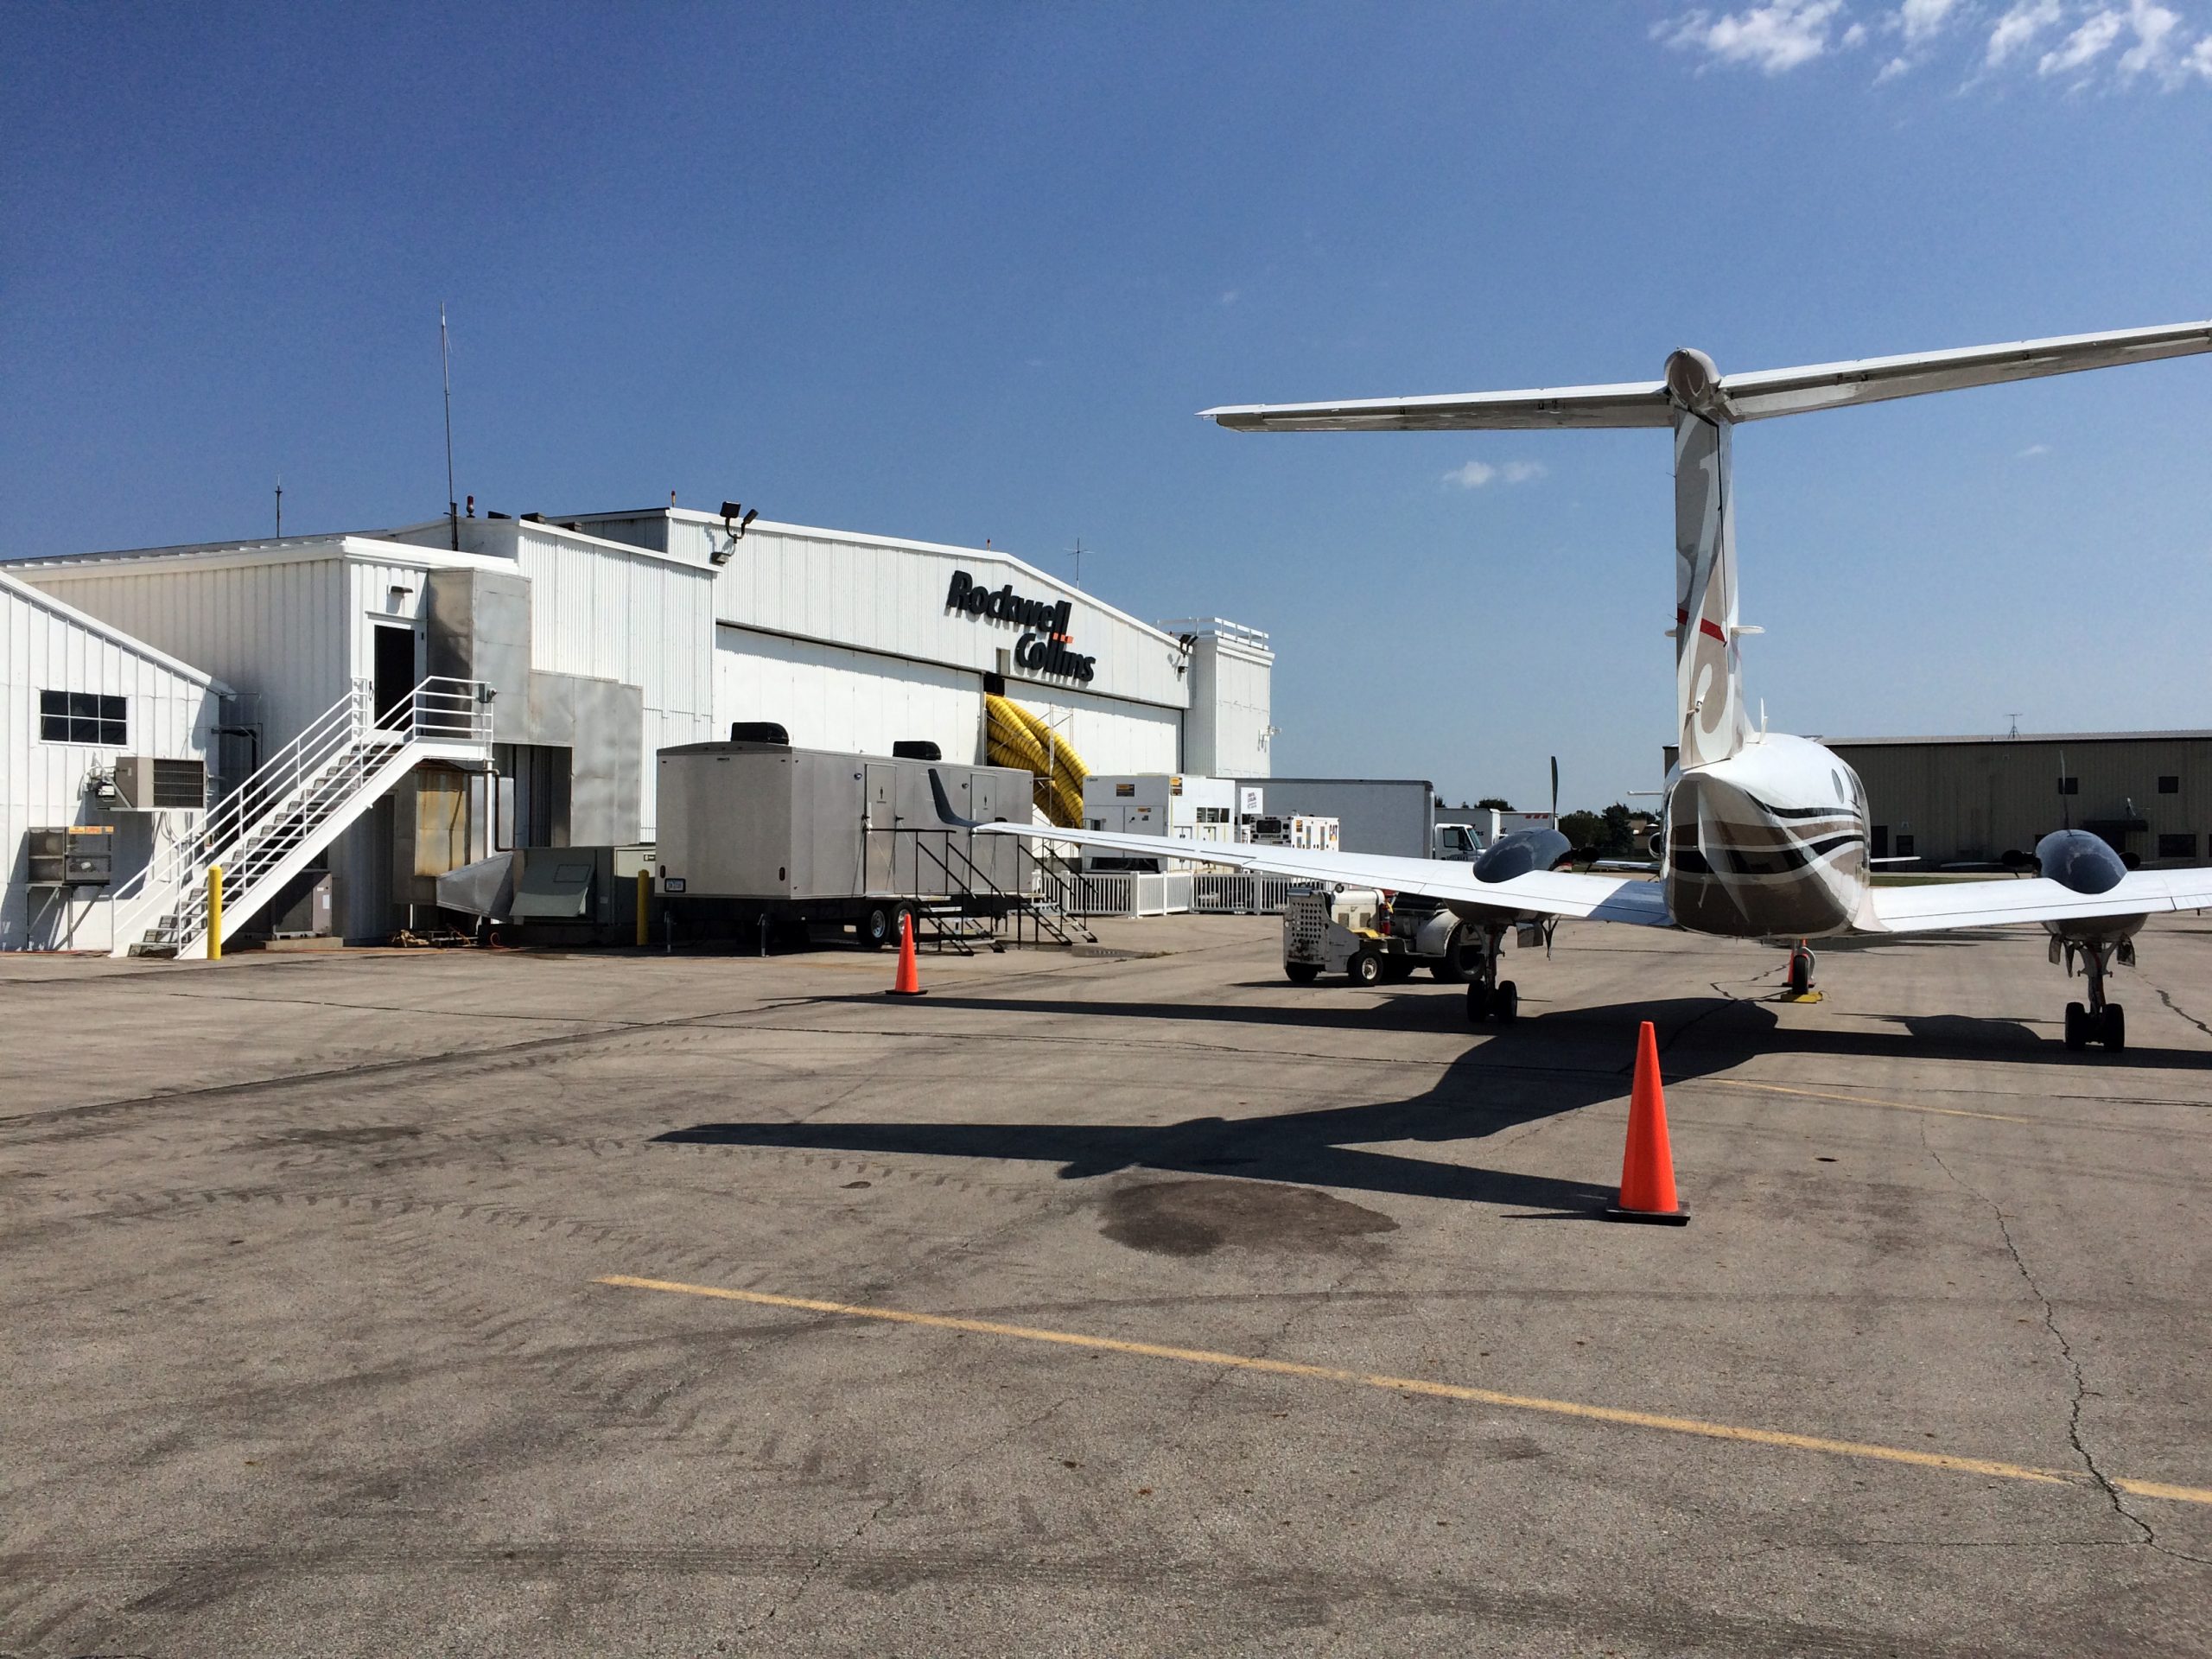 Airplane, Generator and Air Conditioning units outside of airplane hangar